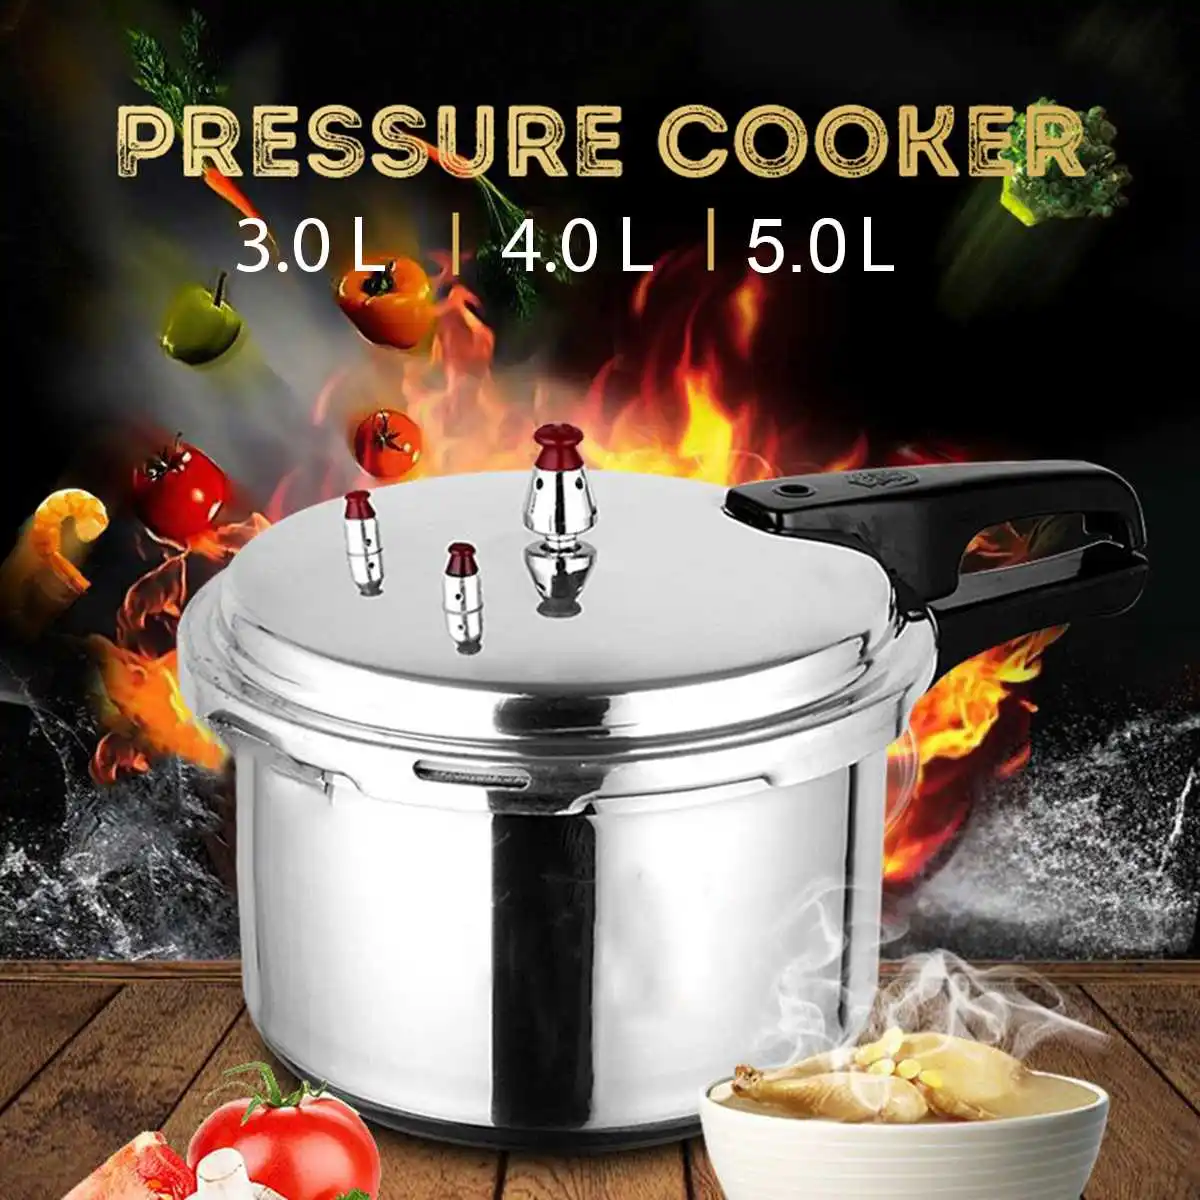 

Kitchen High Pressure Cooker Cookware Soup Meat pot for Gas Stove/Induction Cooker Outdoor Camping Cook Tool Steamer